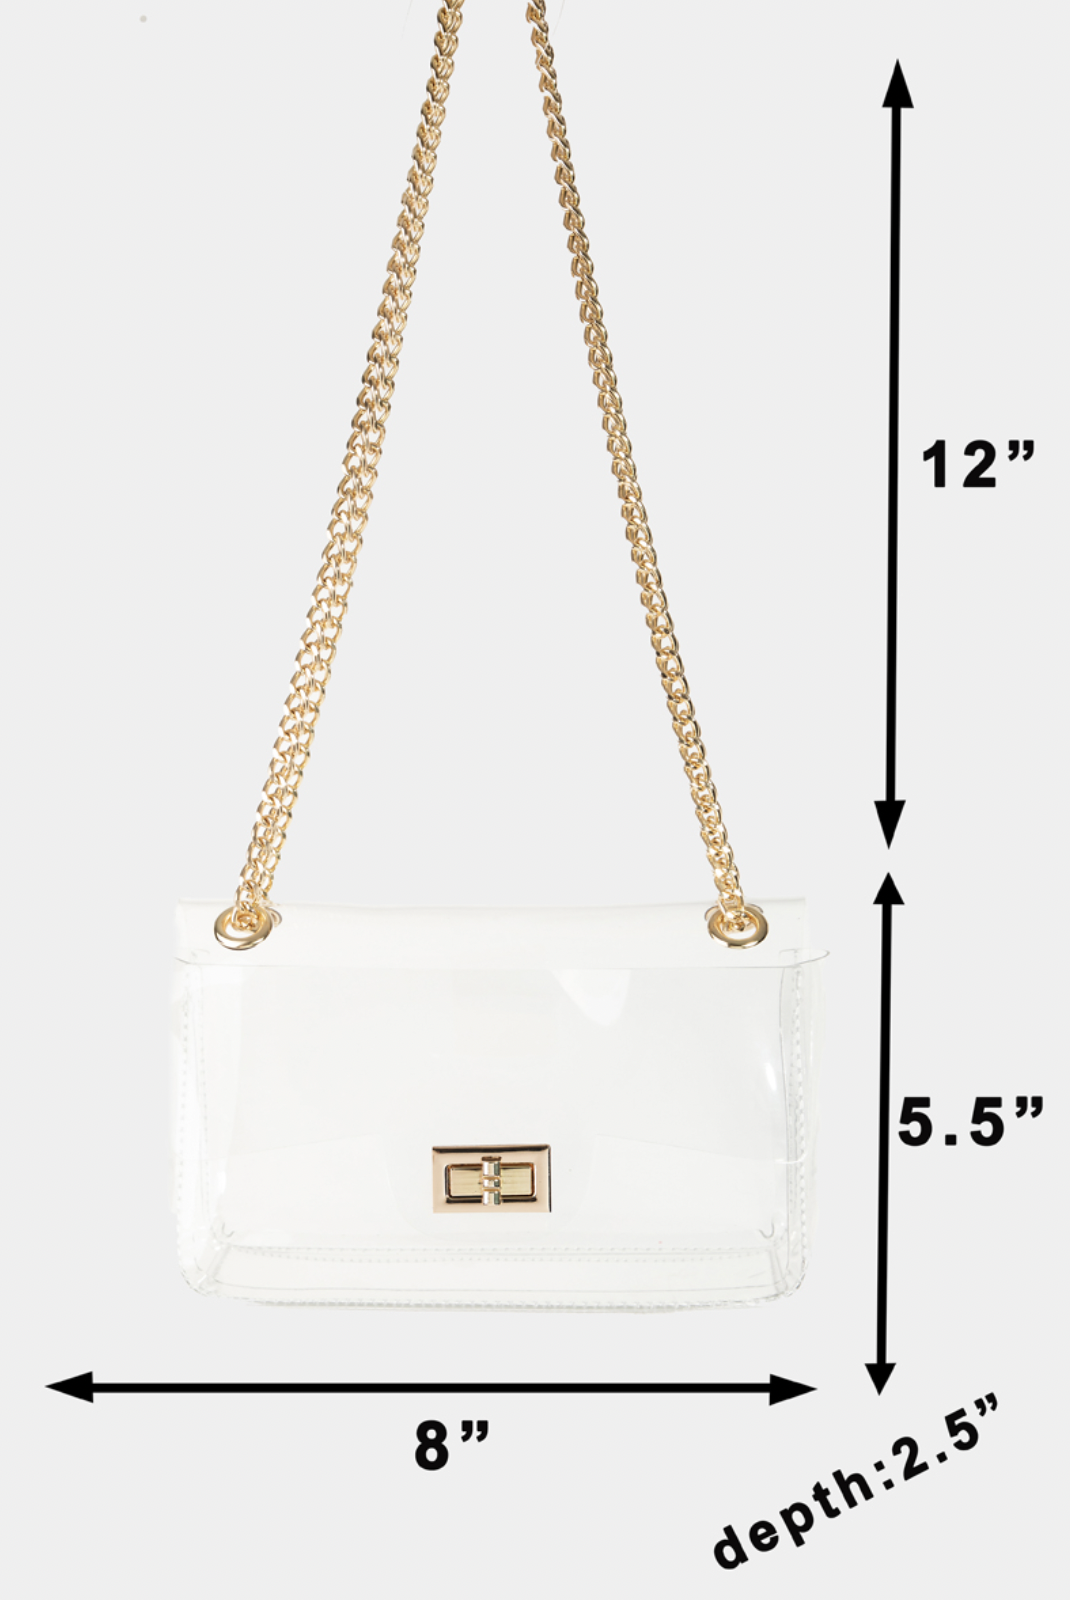 FAME ACCESSORIES SADIE CLEAR CROSSBODY WITH PARTY CLUTCH